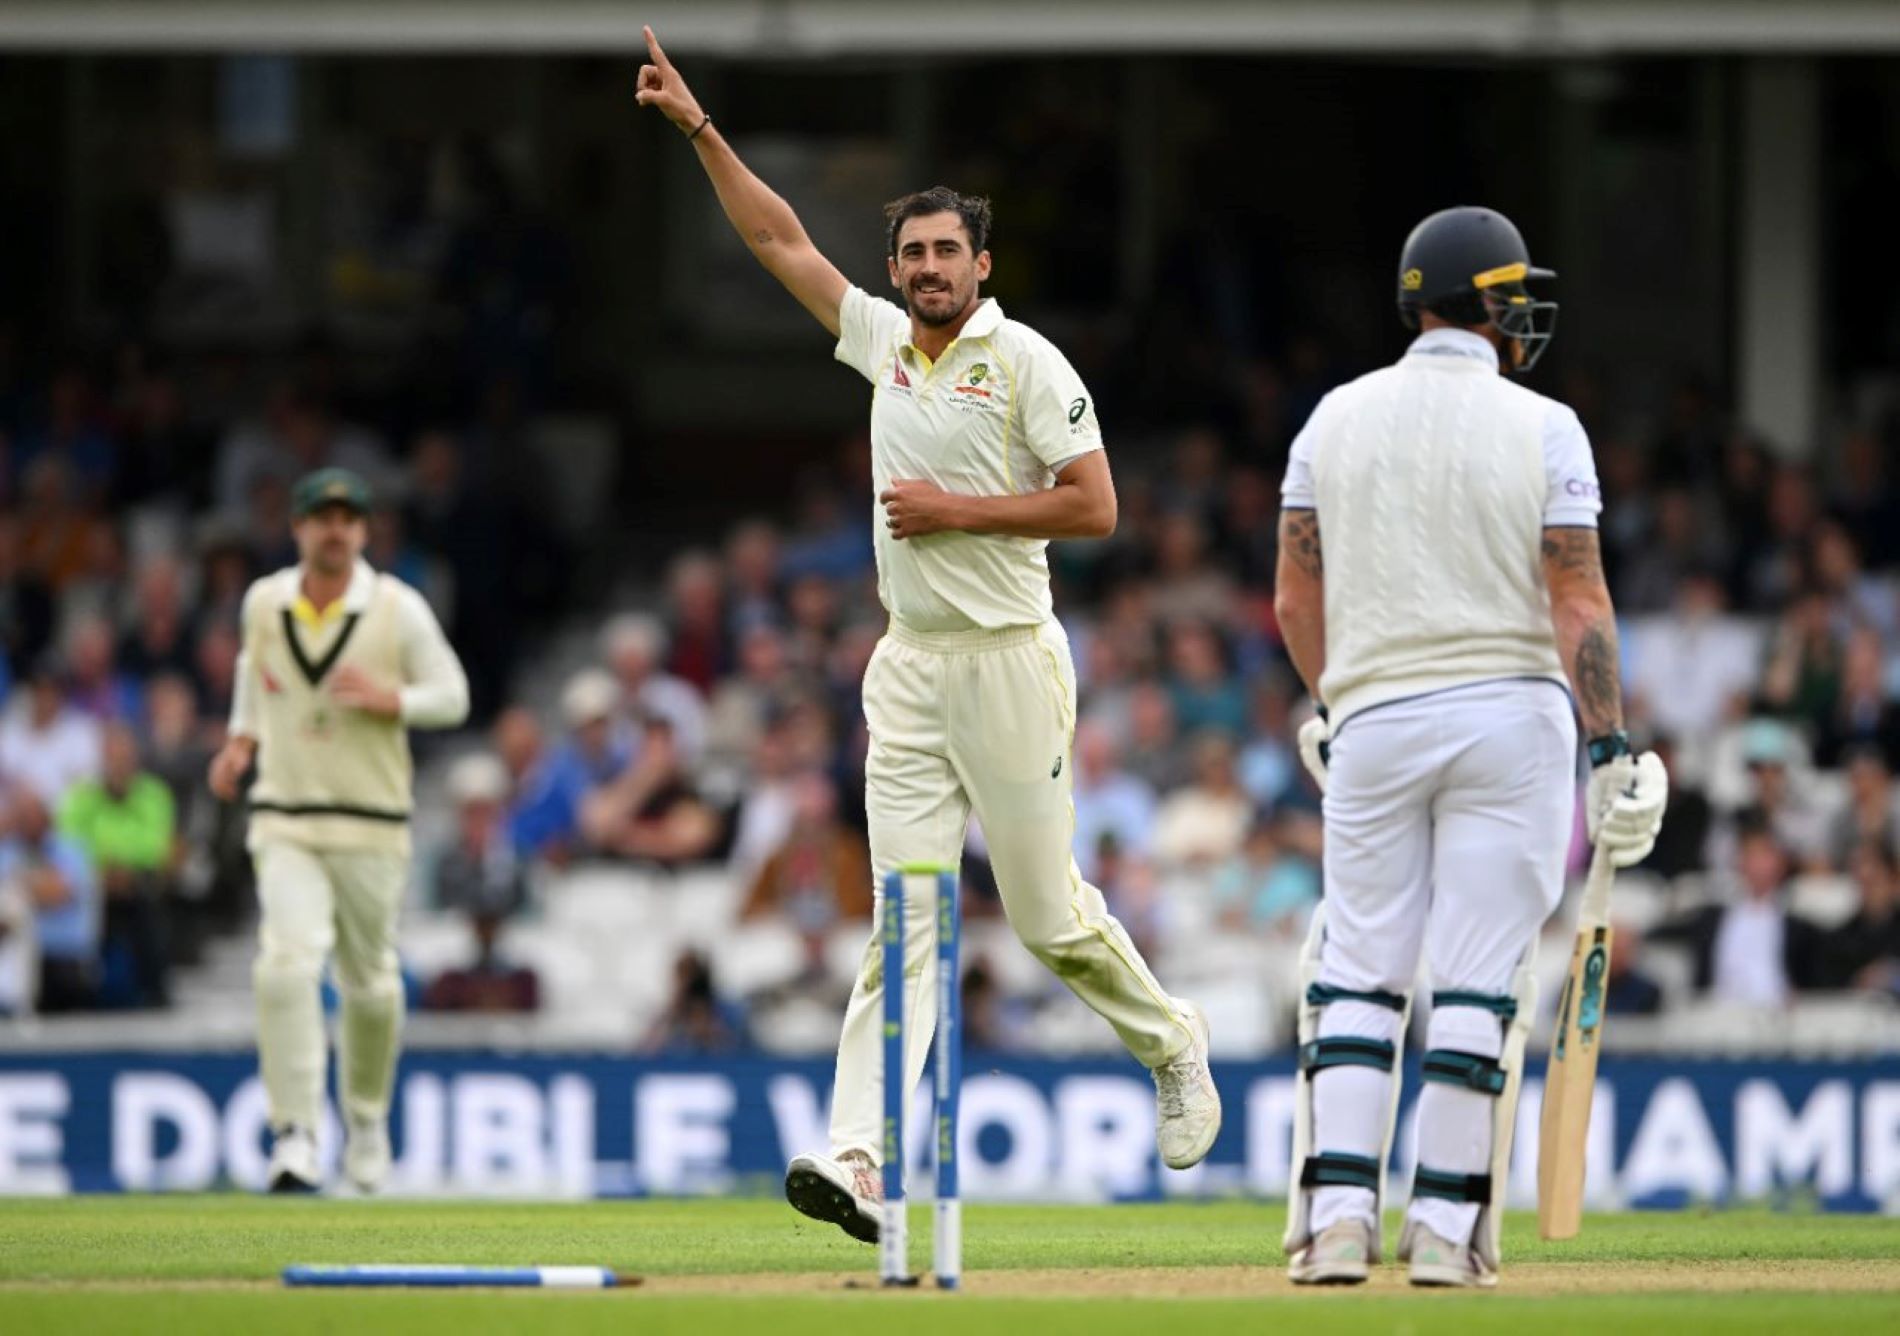 Mitchell Starc cleaned up Ben Stokes with an absolute screamer.